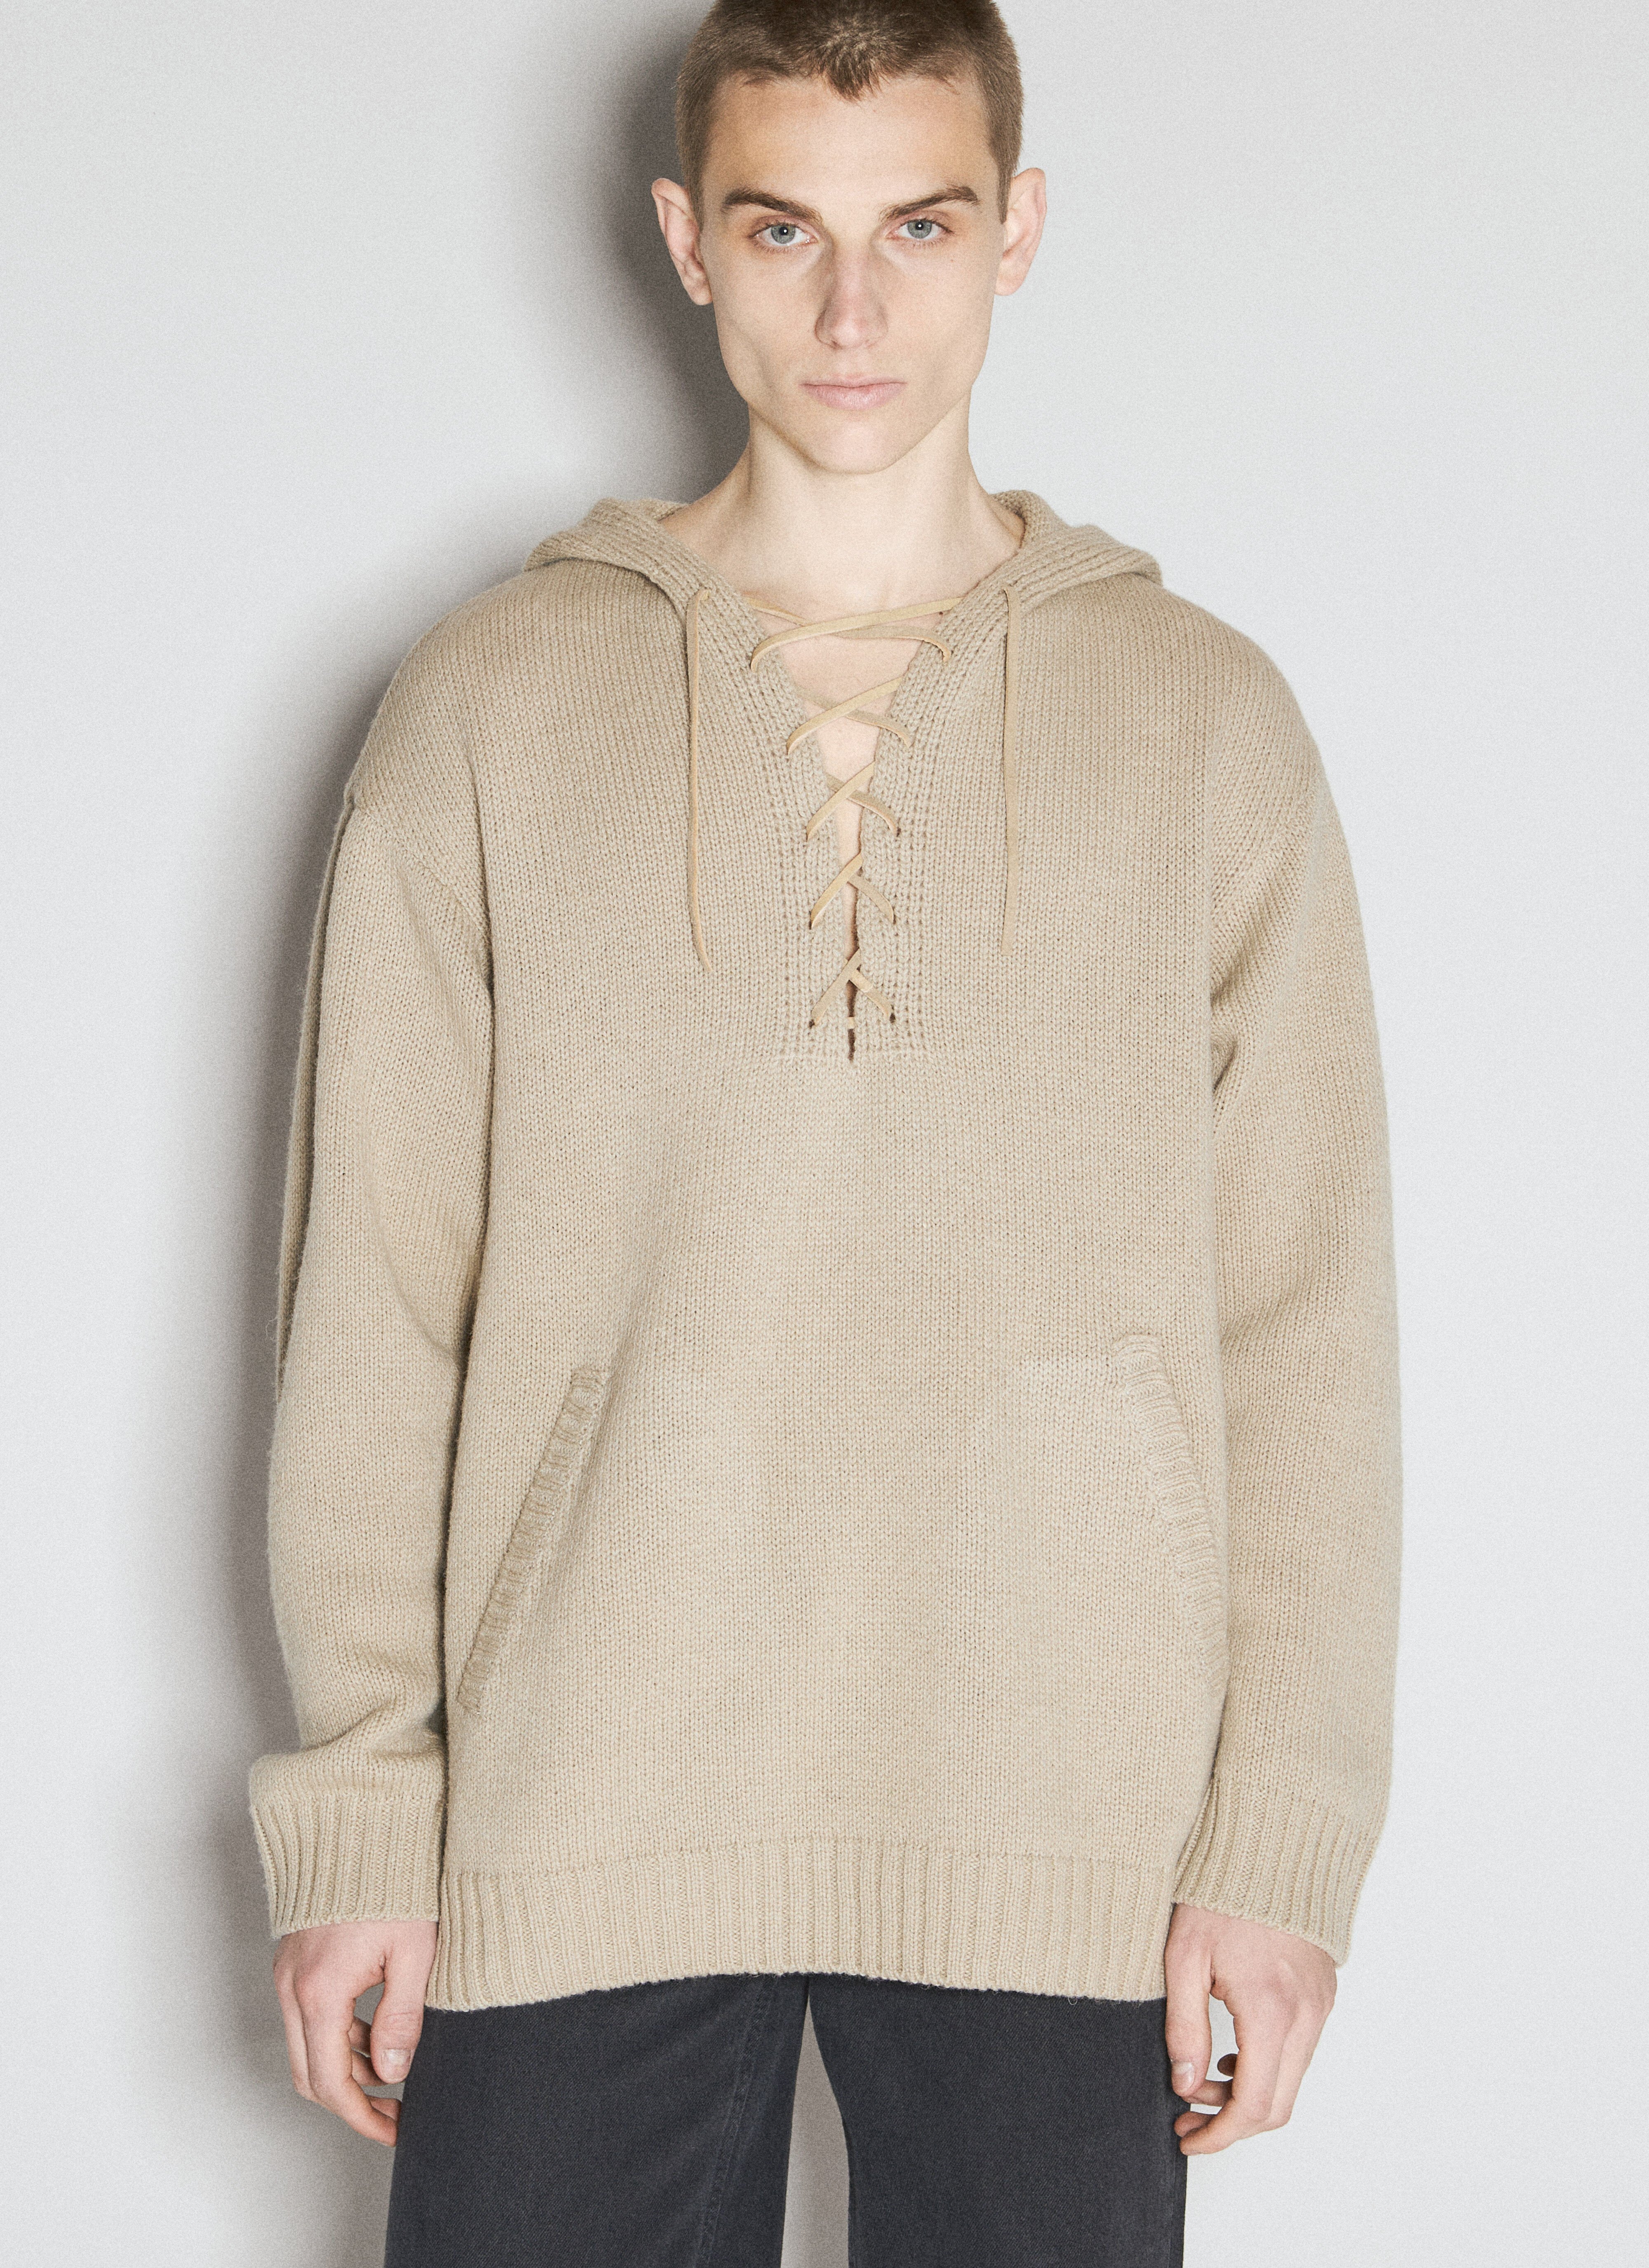 UNDERCOVER Lace-Up Hooded Sweater White und0153001